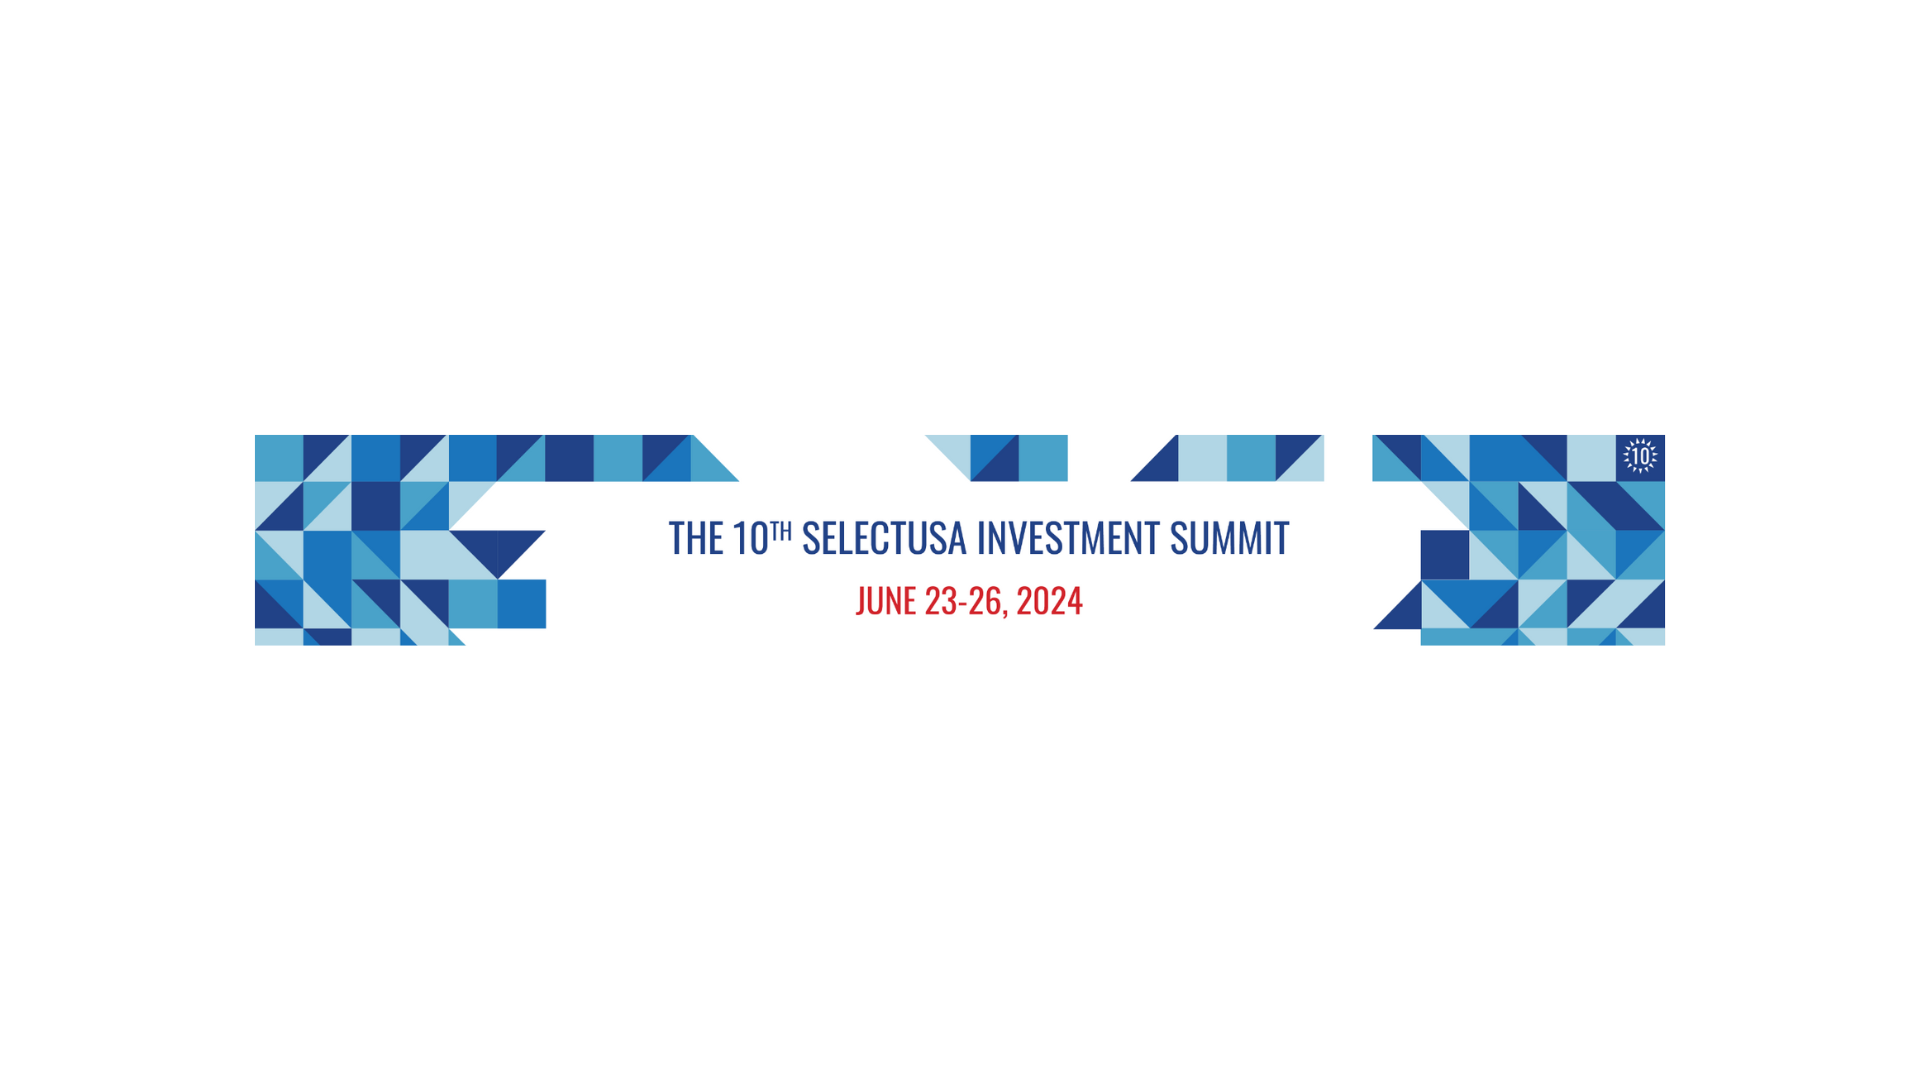 The 10th Select USA Investment Summit 2024